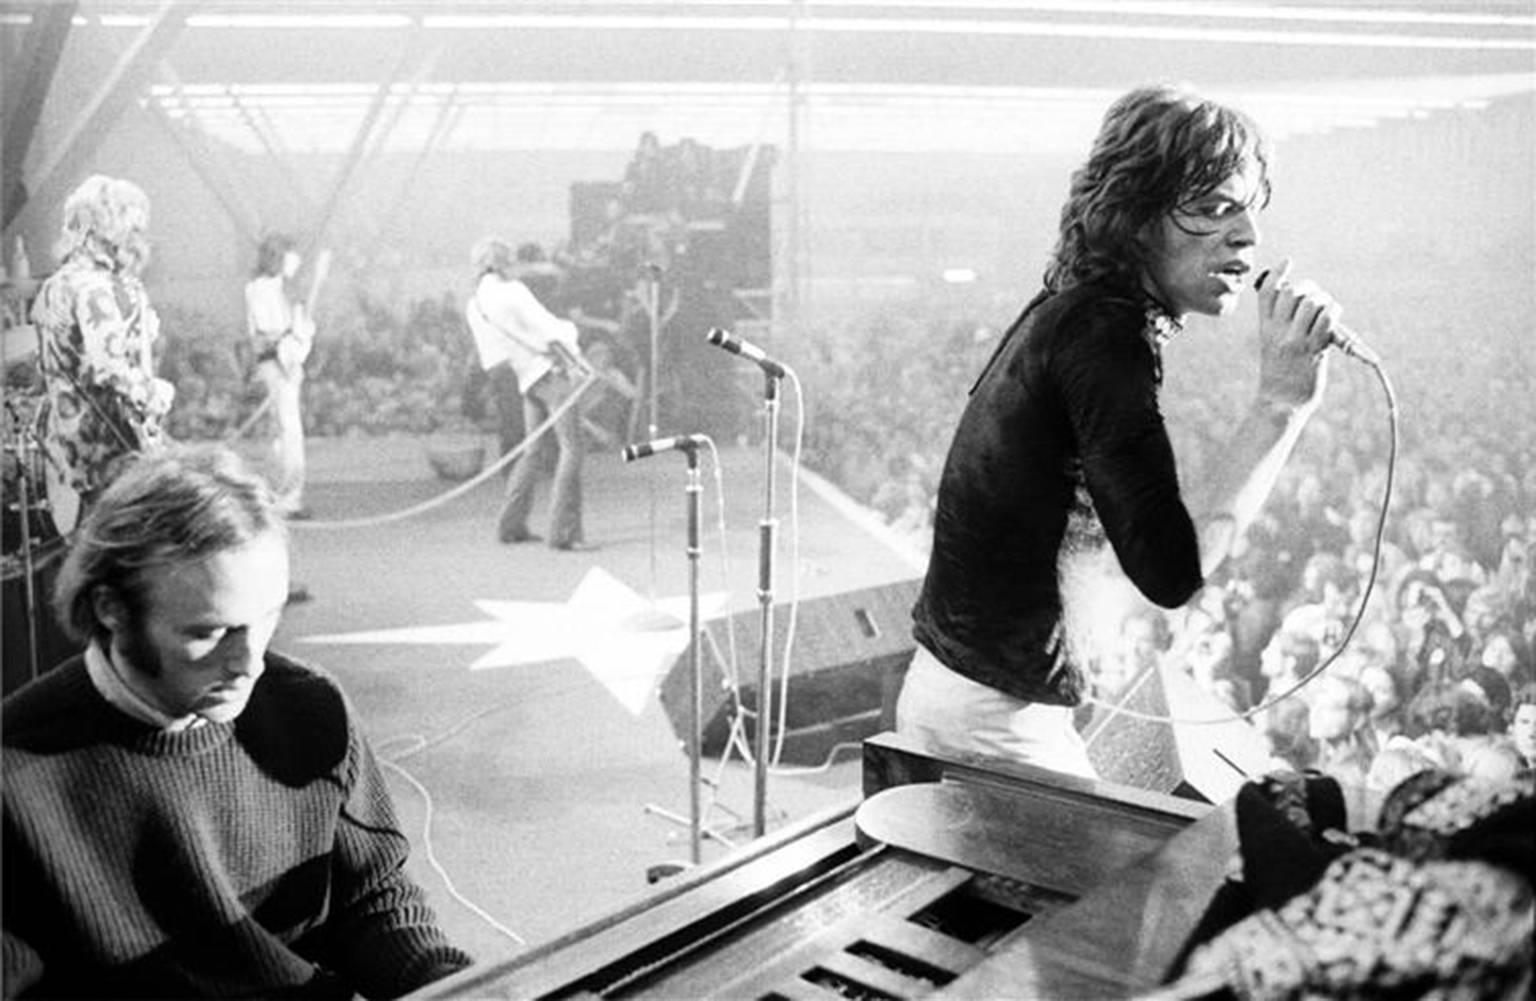 Henry Diltz Black and White Photograph - Rolling Stones & Stephen Stills in Amsterdam, 1970